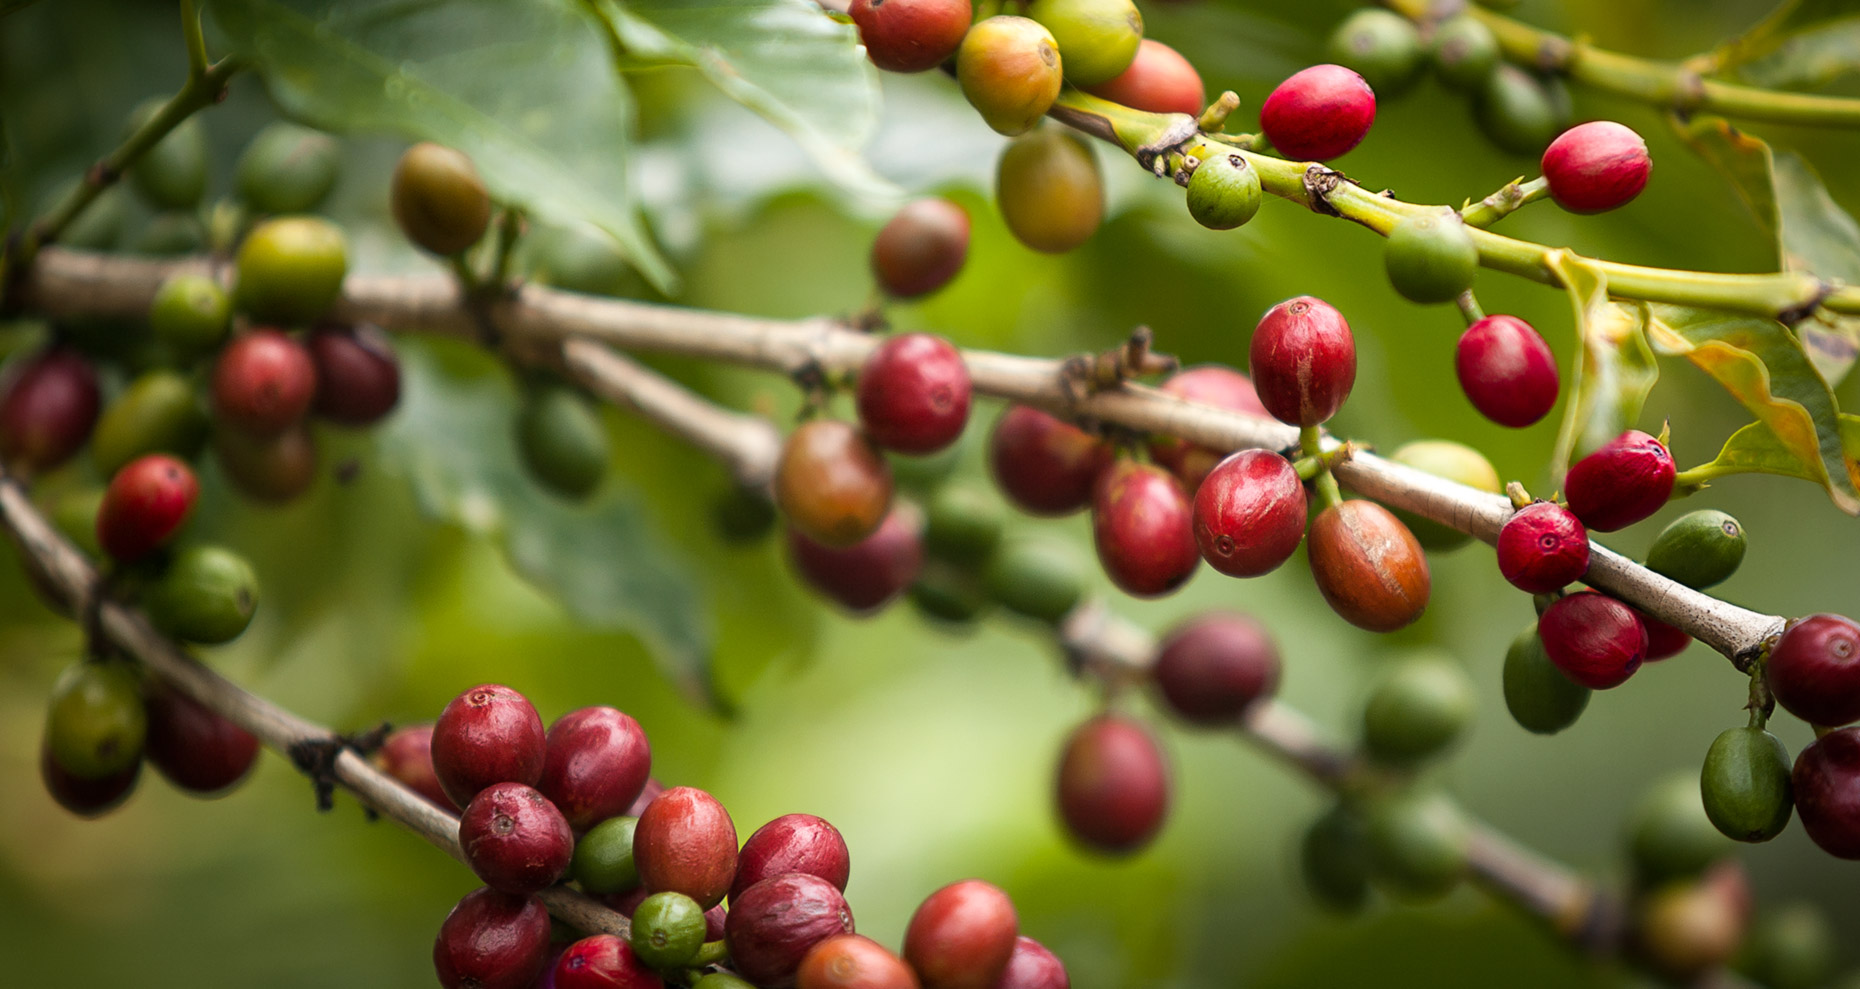 closeup of coffee cherries riping on trees. Agriculture photography